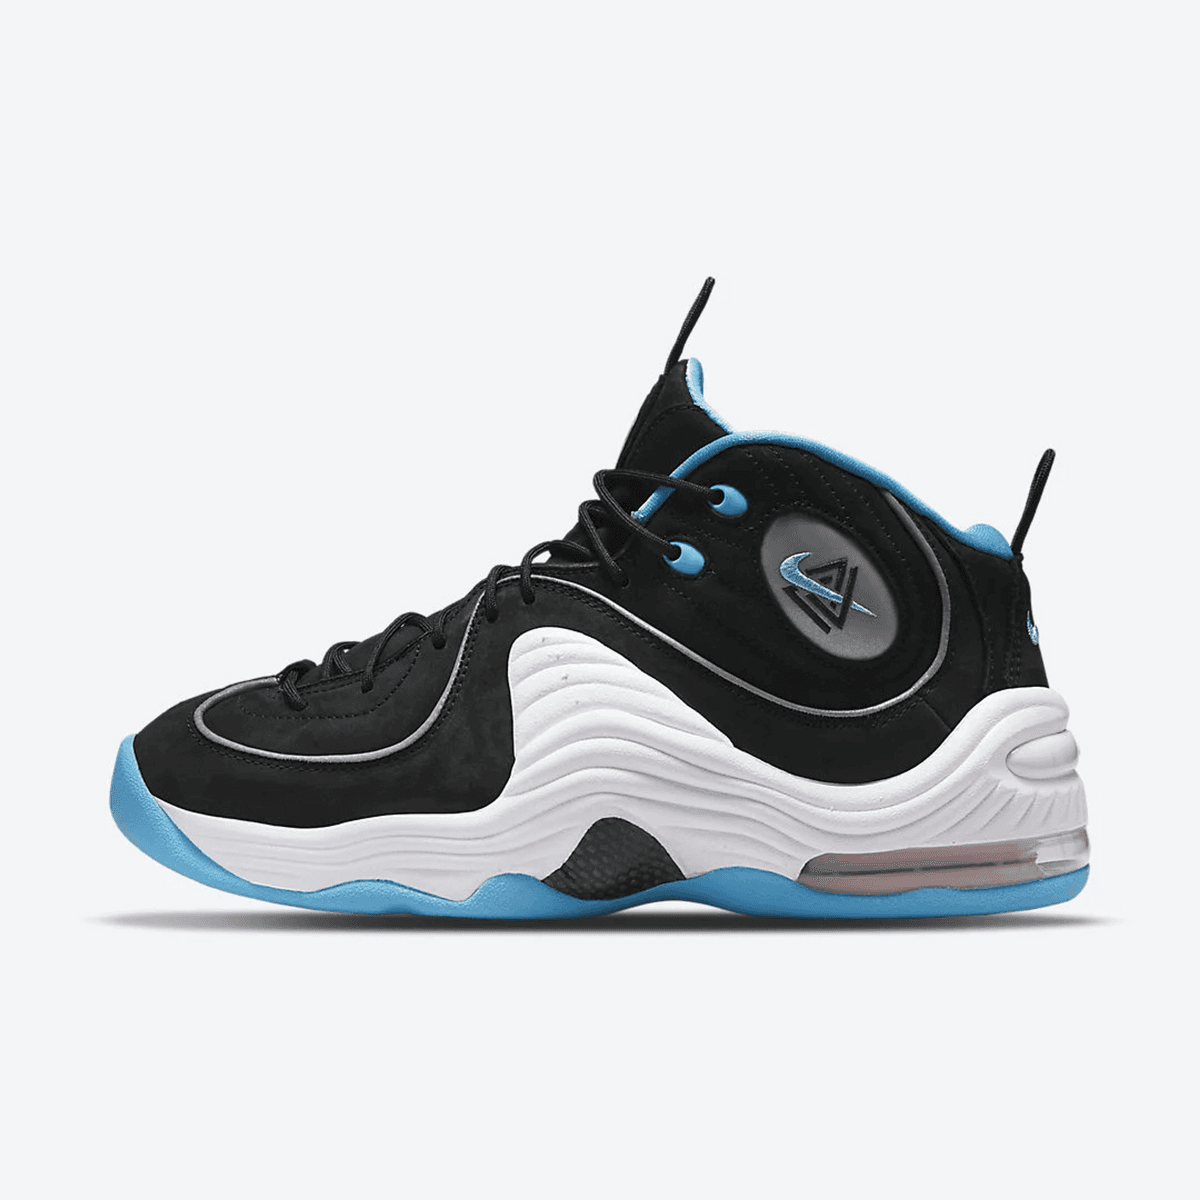 Nike Is Collaborating With Social Status with the Release of the Air Penny 2 Black